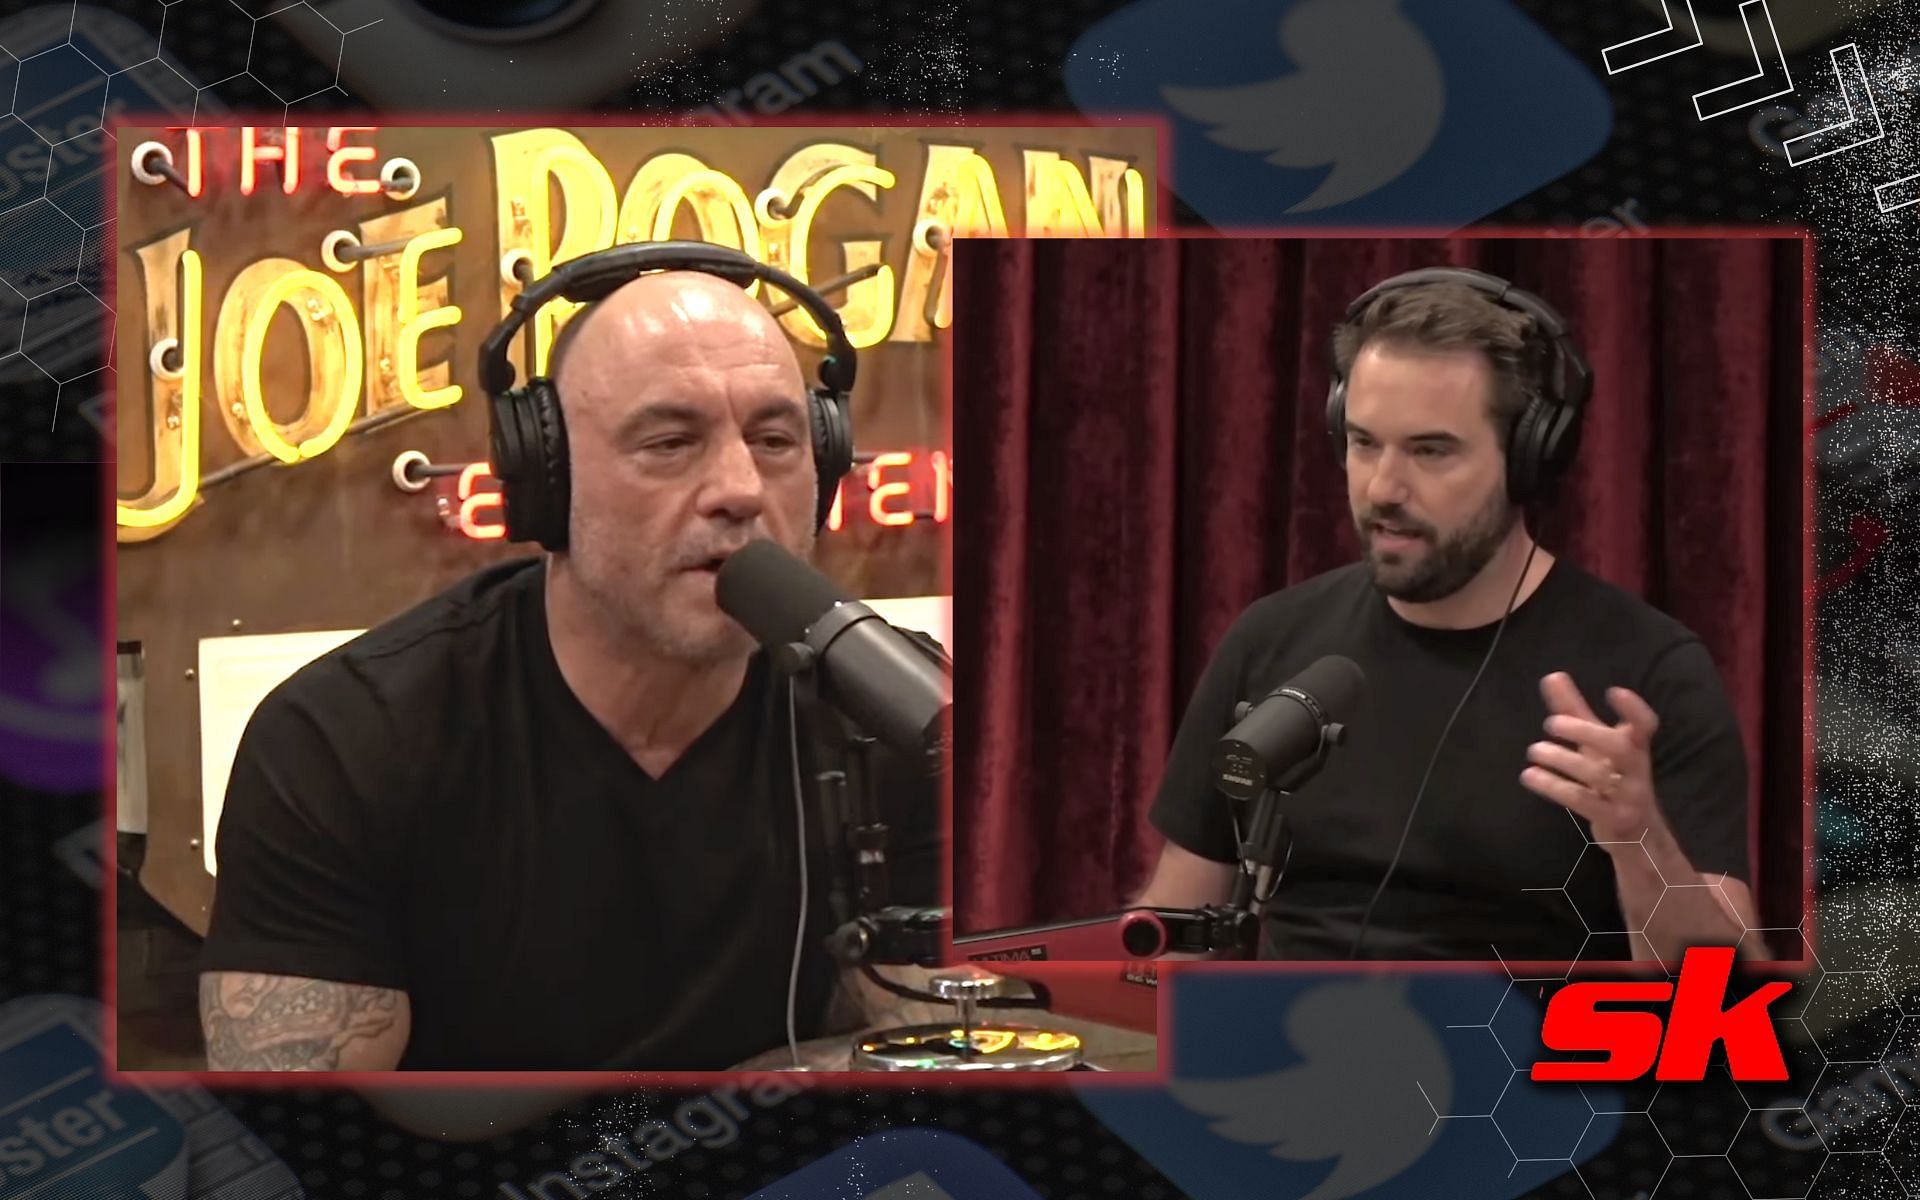 Joe Rogan and Chris Best discuss Twitter and the social media business model. [Image credits: Youtube/ThePowerfulJRE.]